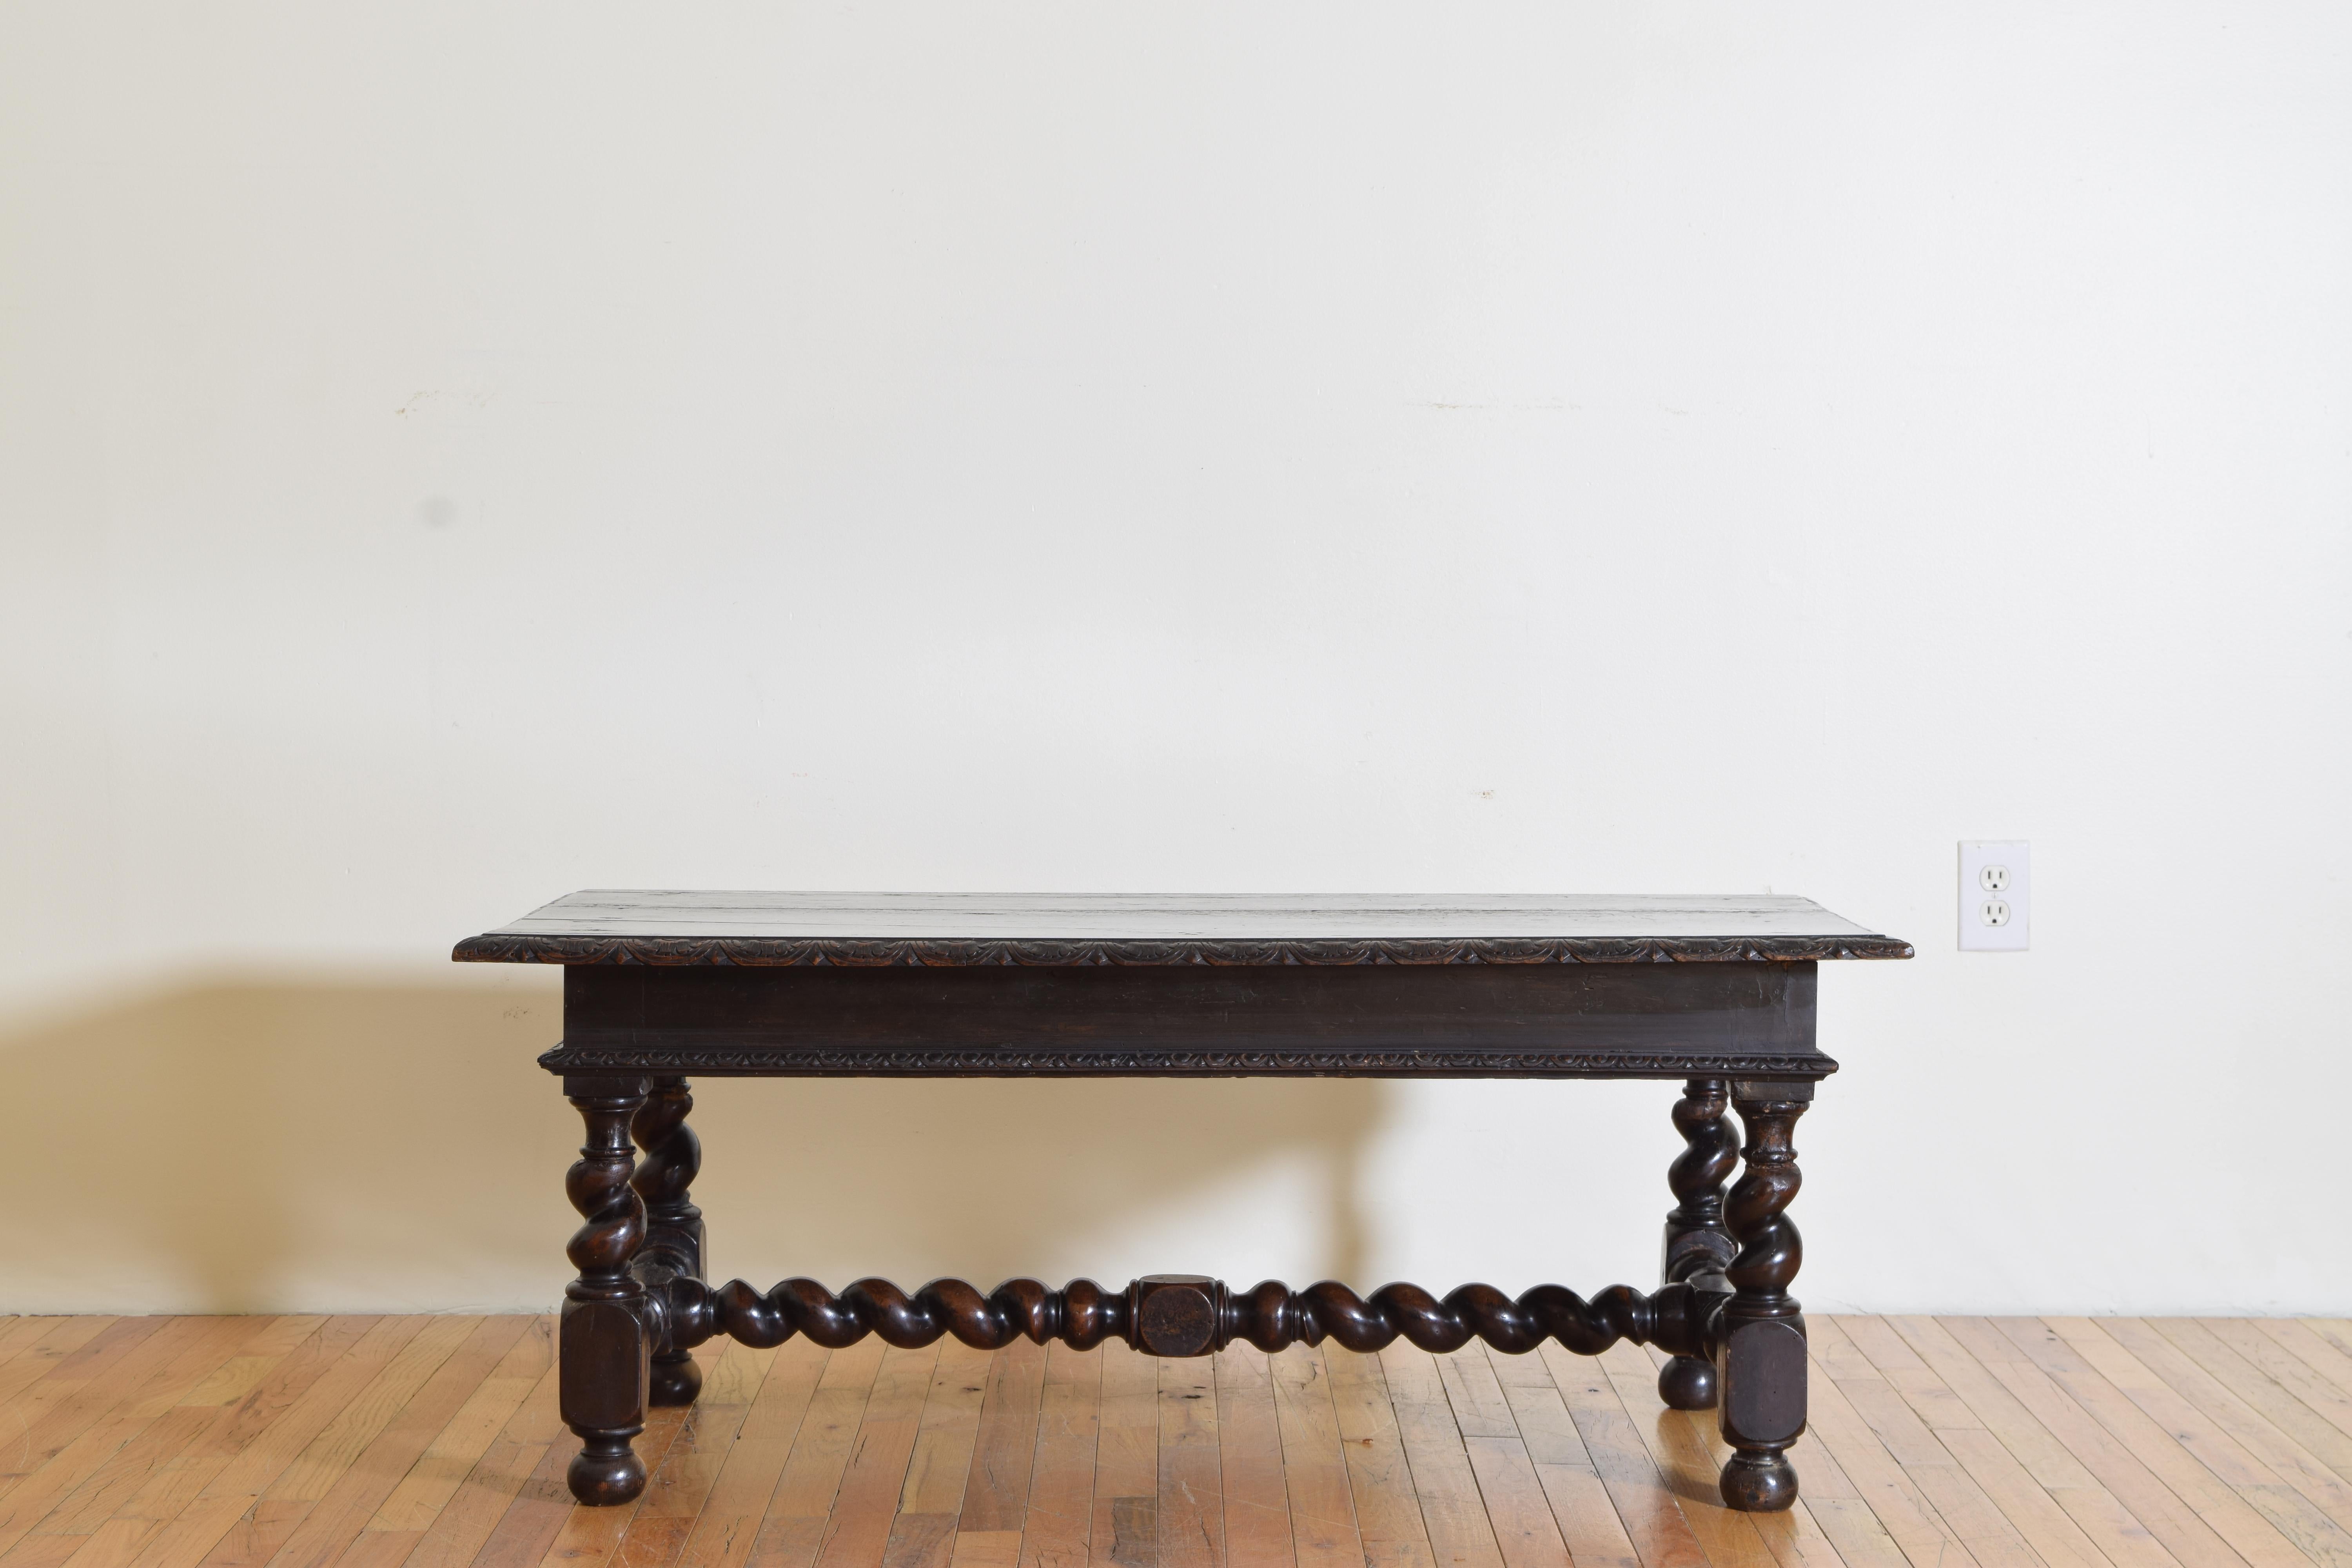 Baroque Revival Italian Baroque Style Carved and Ebonized Walnut Coffee Table, Mid 19th Century